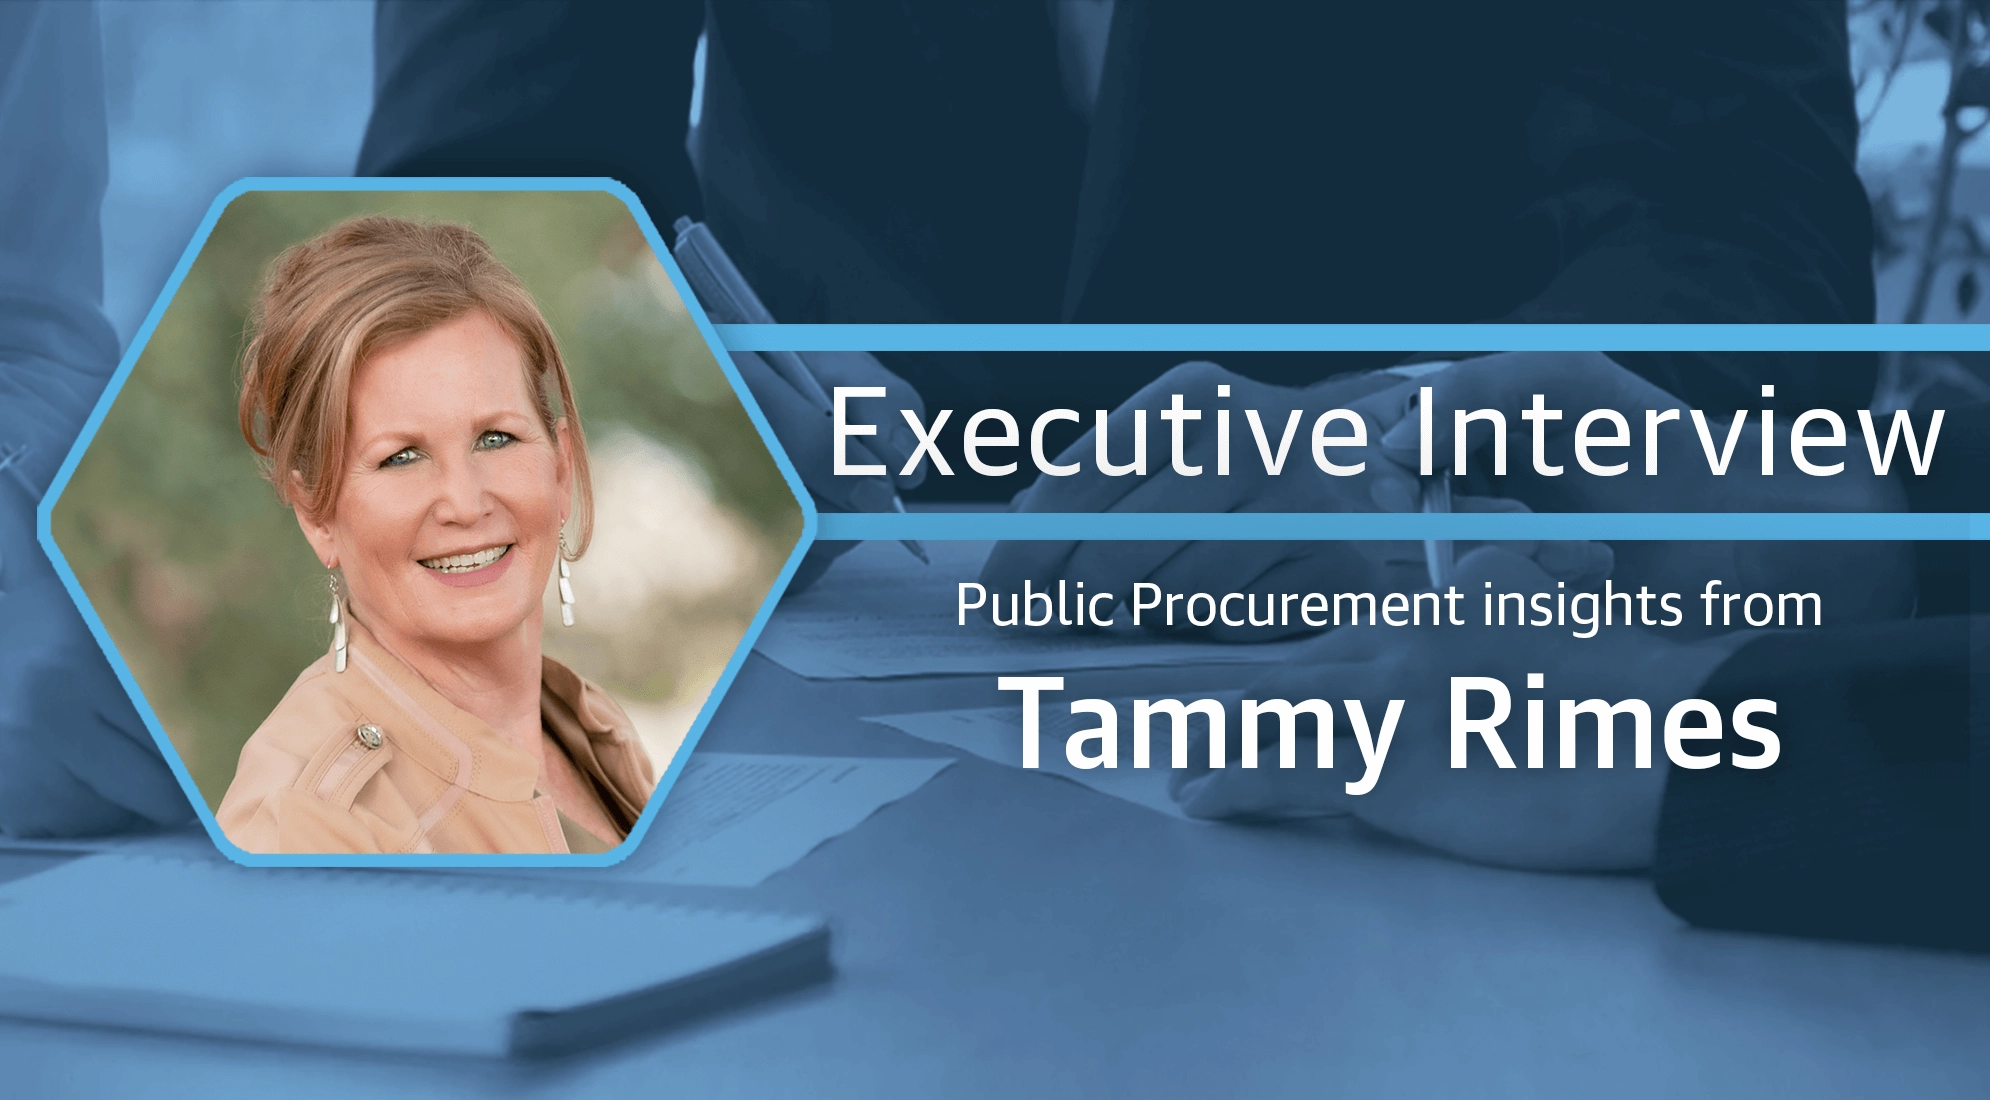 Public Procurement Insights from Tammy Rimes 4